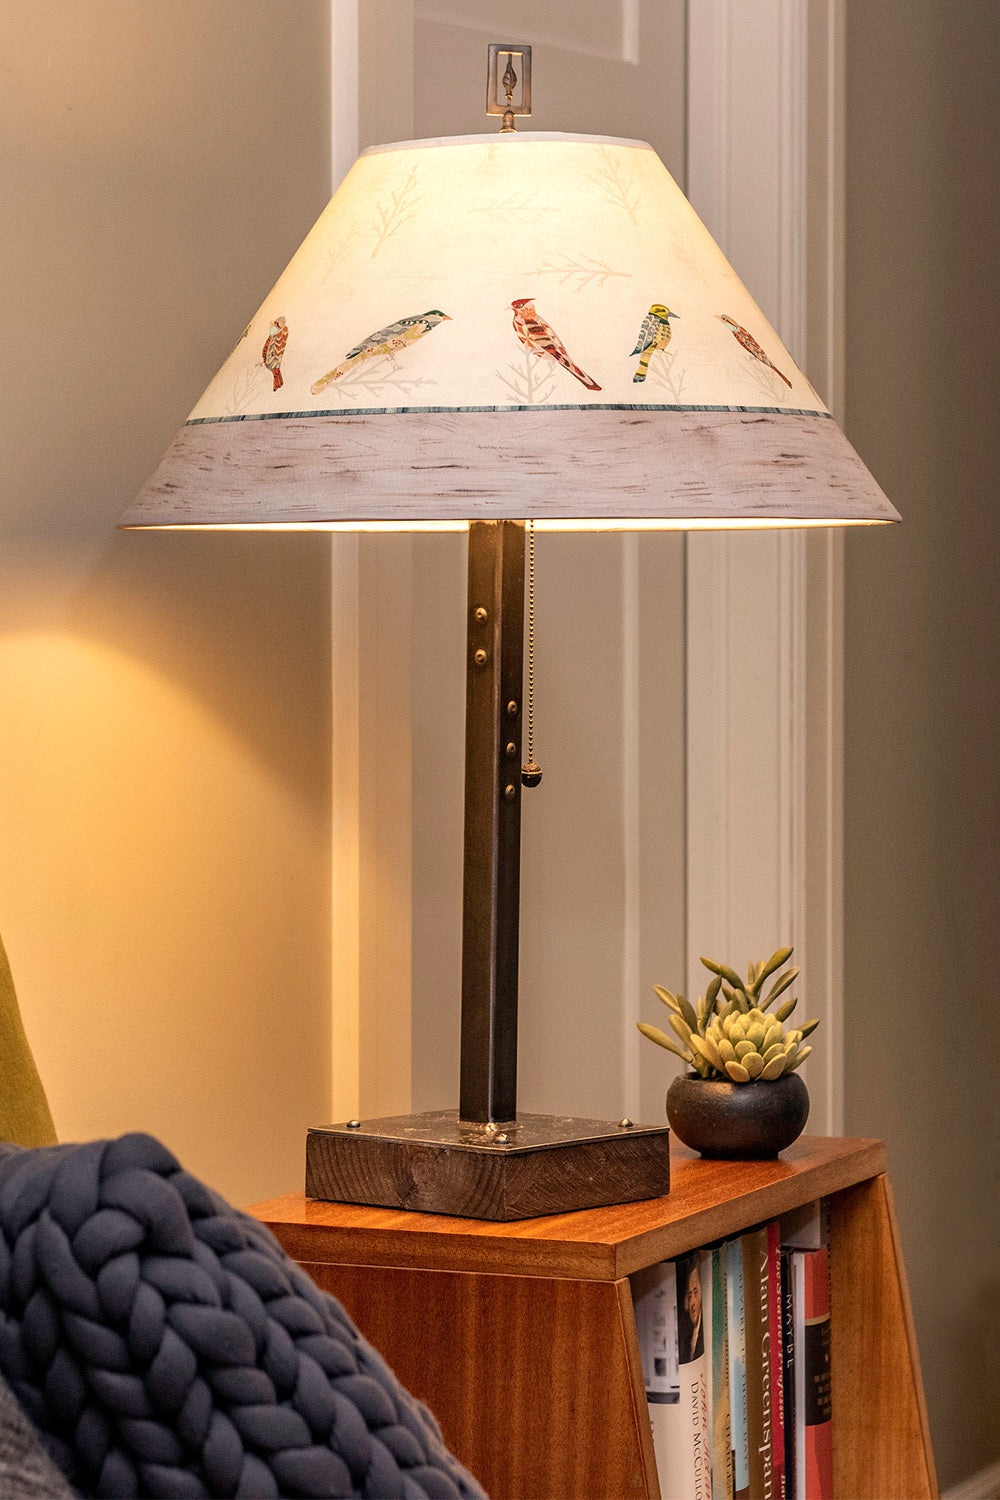 Steel Table Lamp on Wood with Large Conical Shade in Bird Friends